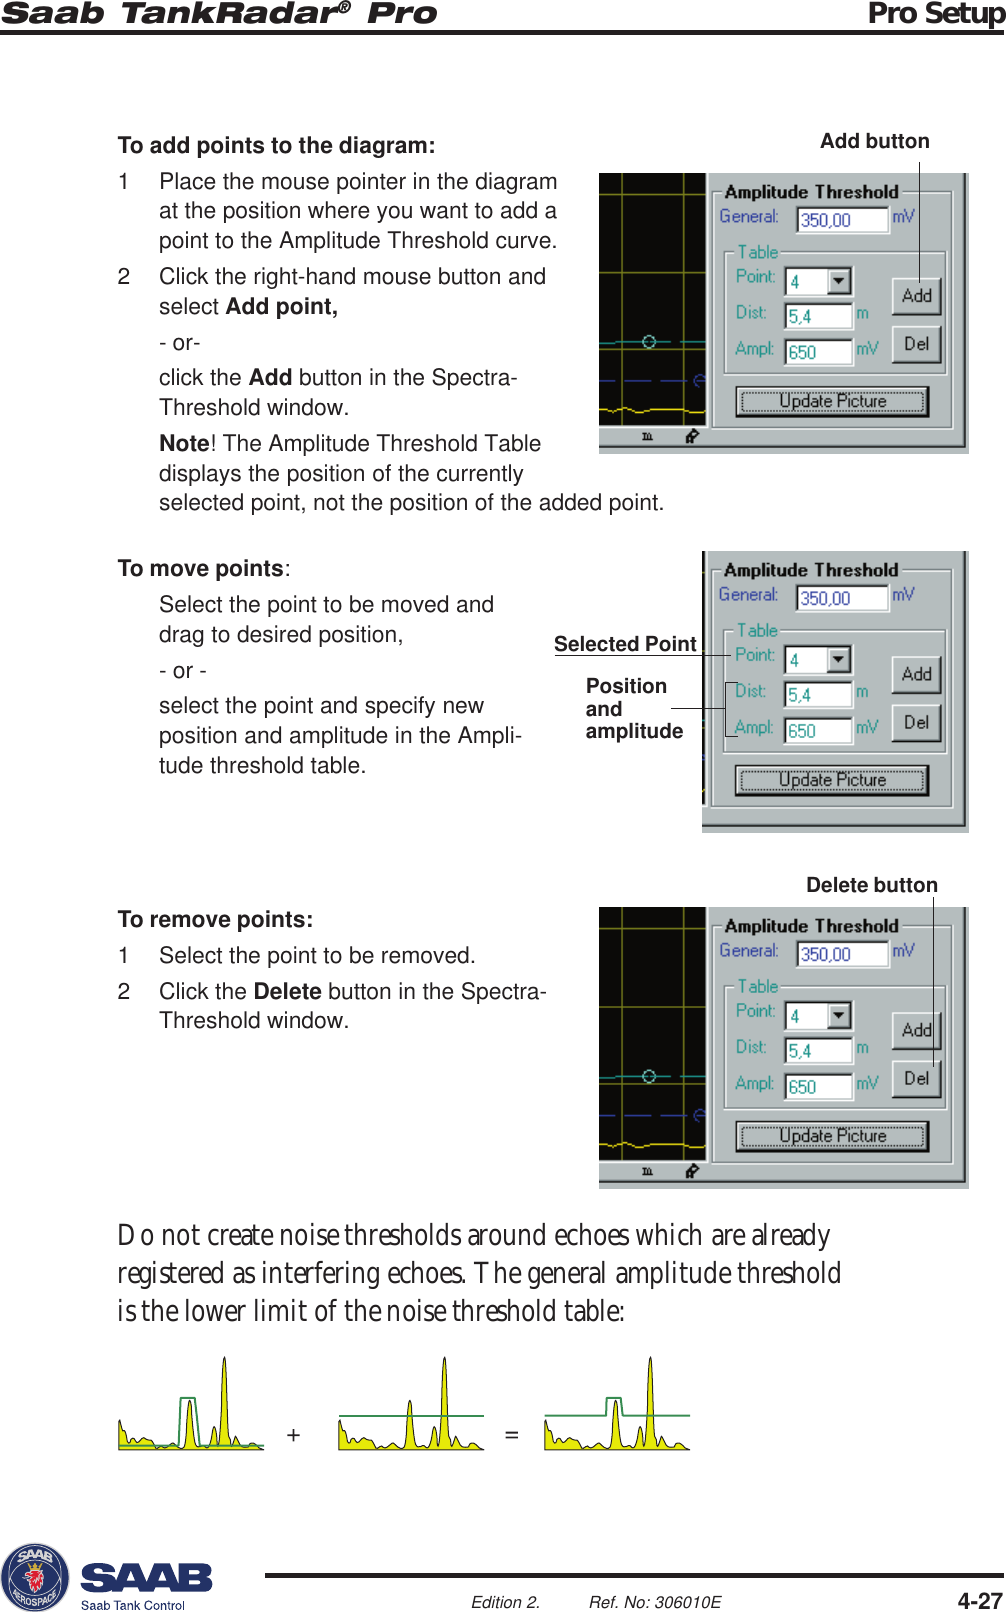 Saab TankRadar® Pro Pro Setup4-27Edition 2. Ref. No: 306010ETo add points to the diagram:1 Place the mouse pointer in the diagramat the position where you want to add apoint to the Amplitude Threshold curve.2 Click the right-hand mouse button andselect Add point,- or-click the Add button in the Spectra-Threshold window.Note! The Amplitude Threshold Tabledisplays the position of the currentlyselected point, not the position of the added point.To move points:Select the point to be moved anddrag to desired position,- or -select the point and specify newposition and amplitude in the Ampli-tude threshold table.To remove points:1 Select the point to be removed.2 Click the Delete button in the Spectra-Threshold window.Do not create noise thresholds around echoes which are alreadyregistered as interfering echoes. The general amplitude thresholdis the lower limit of the noise threshold table:Selected PointPositionandamplitudeDelete buttonAdd button